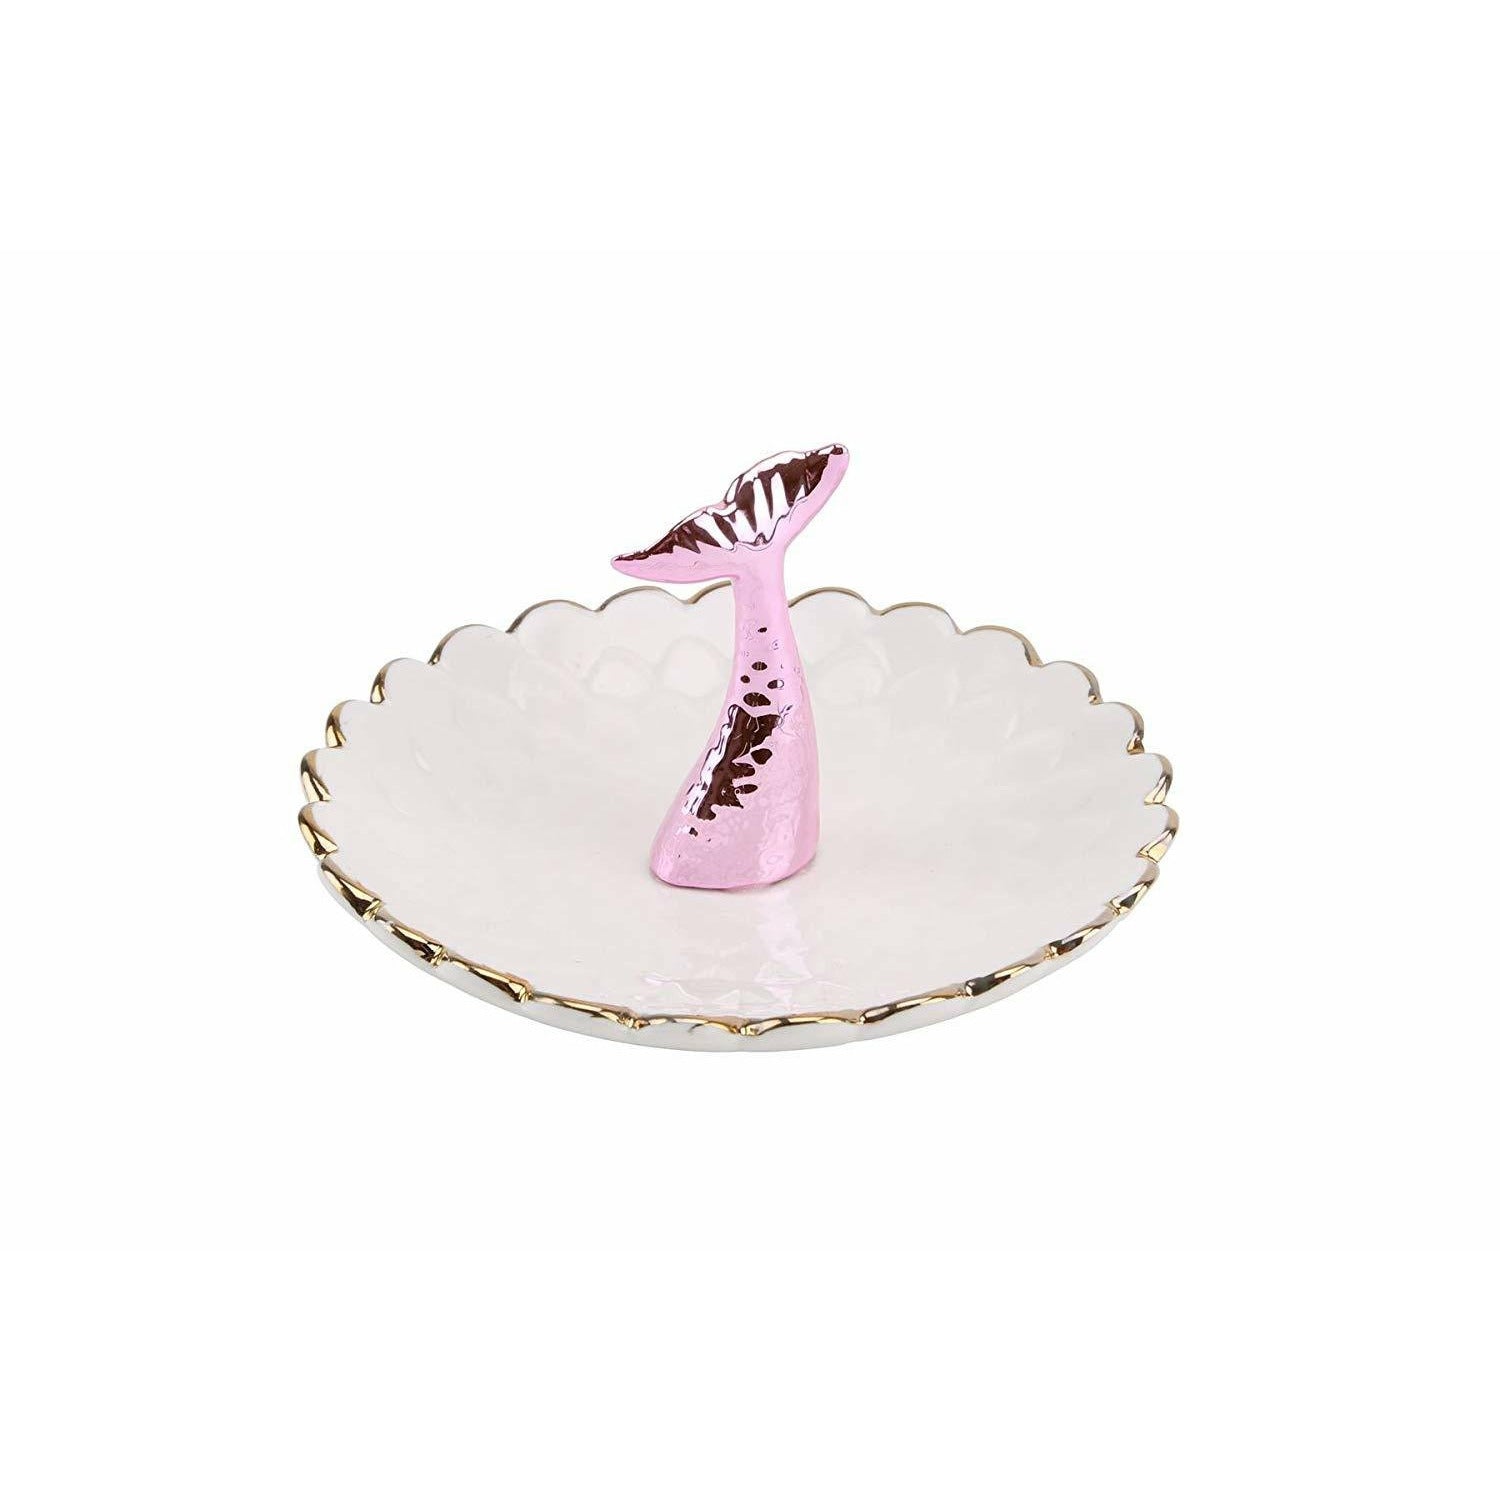 Mermaid Tail Ring Dish Not specified